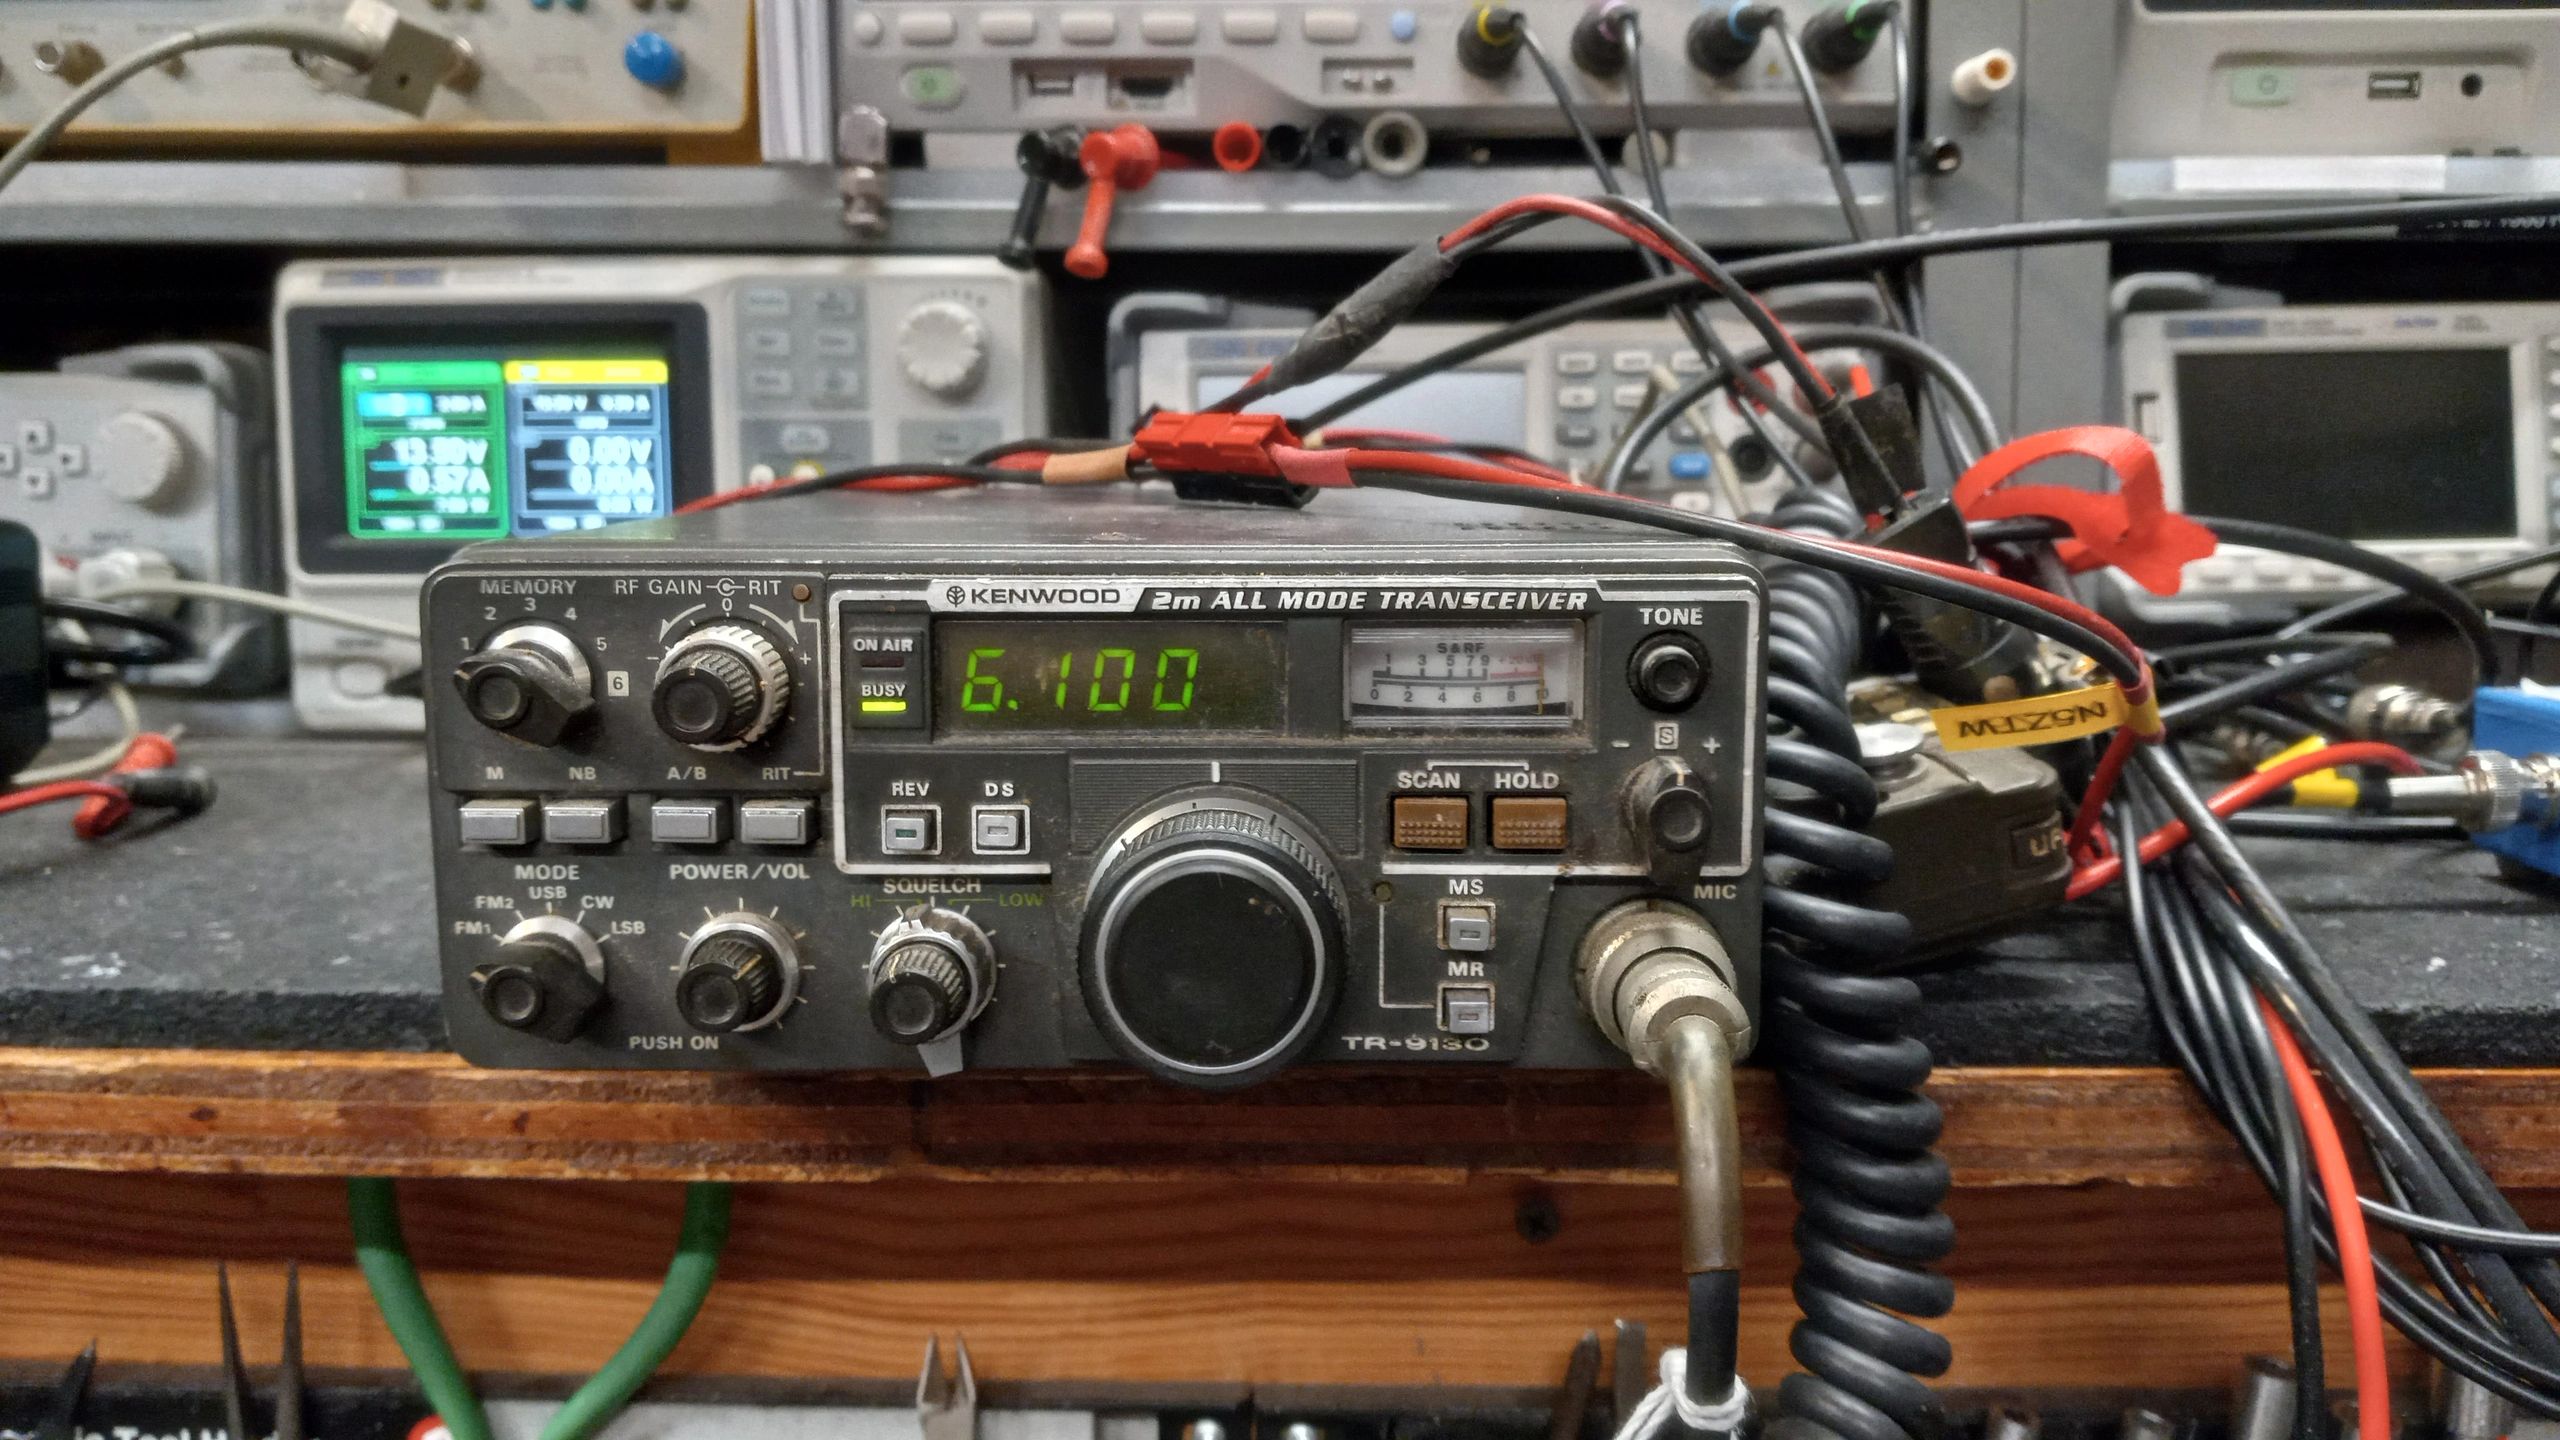 Kenwood TR-9130 2M all mode